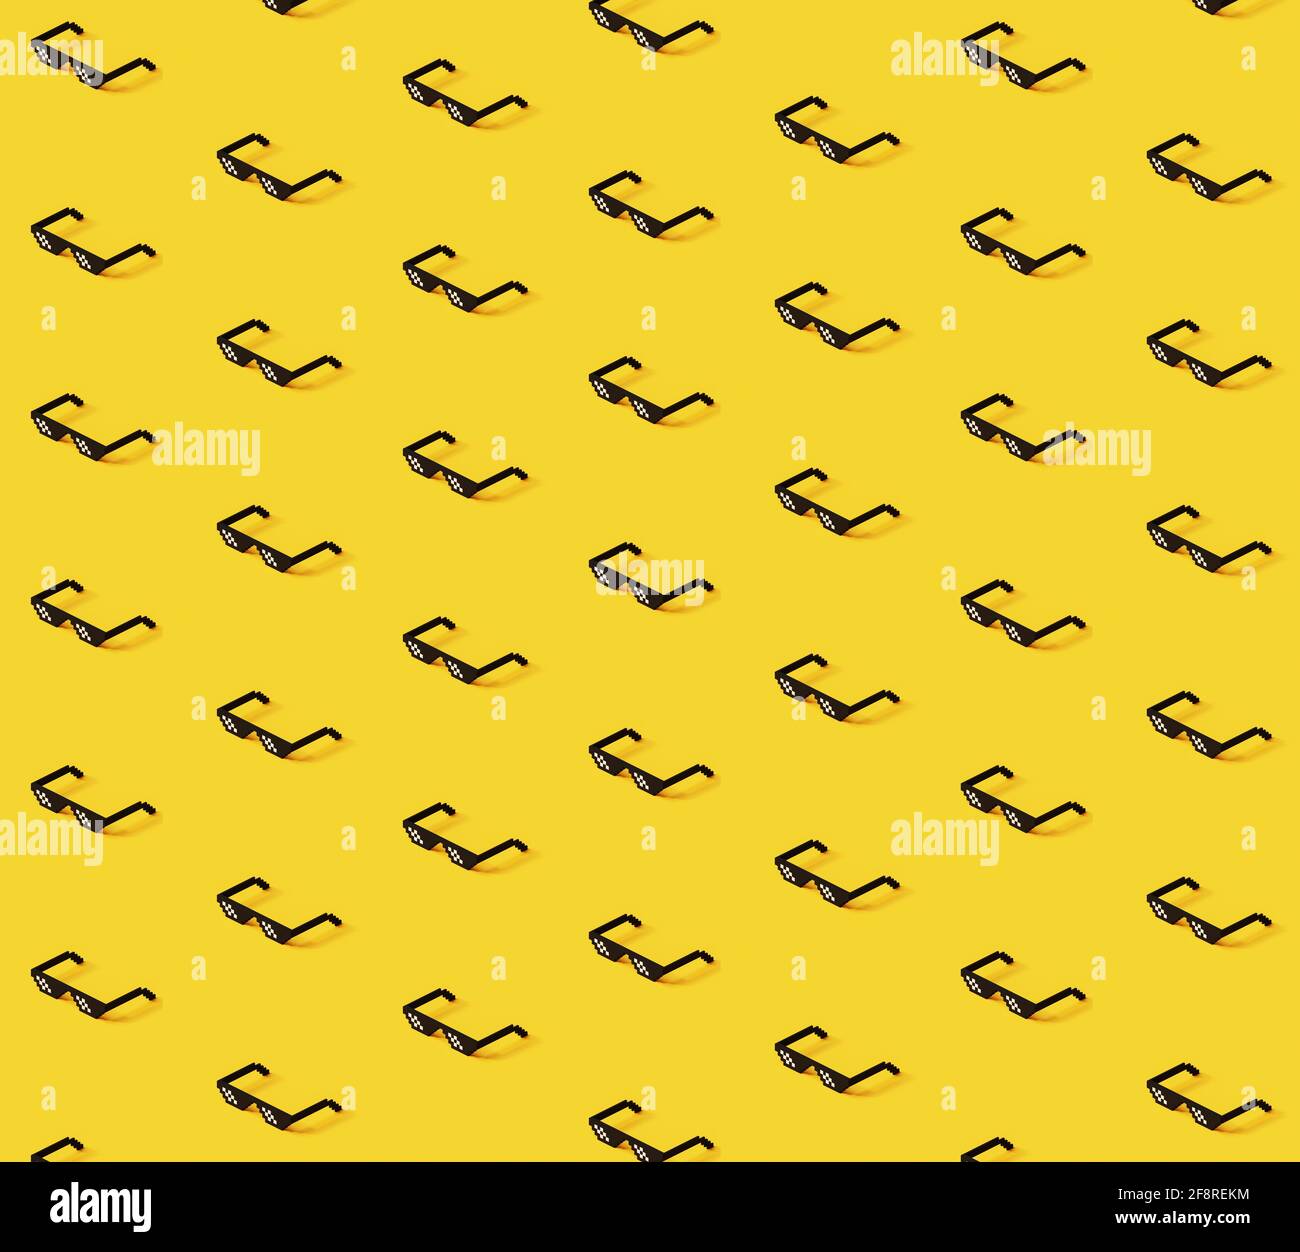 Thug life meme glasses pixel art 3d pattern. Isometric view of pixel art glasses, 3D rendered minimalistic pattern with yellow background. Web banner Stock Photo